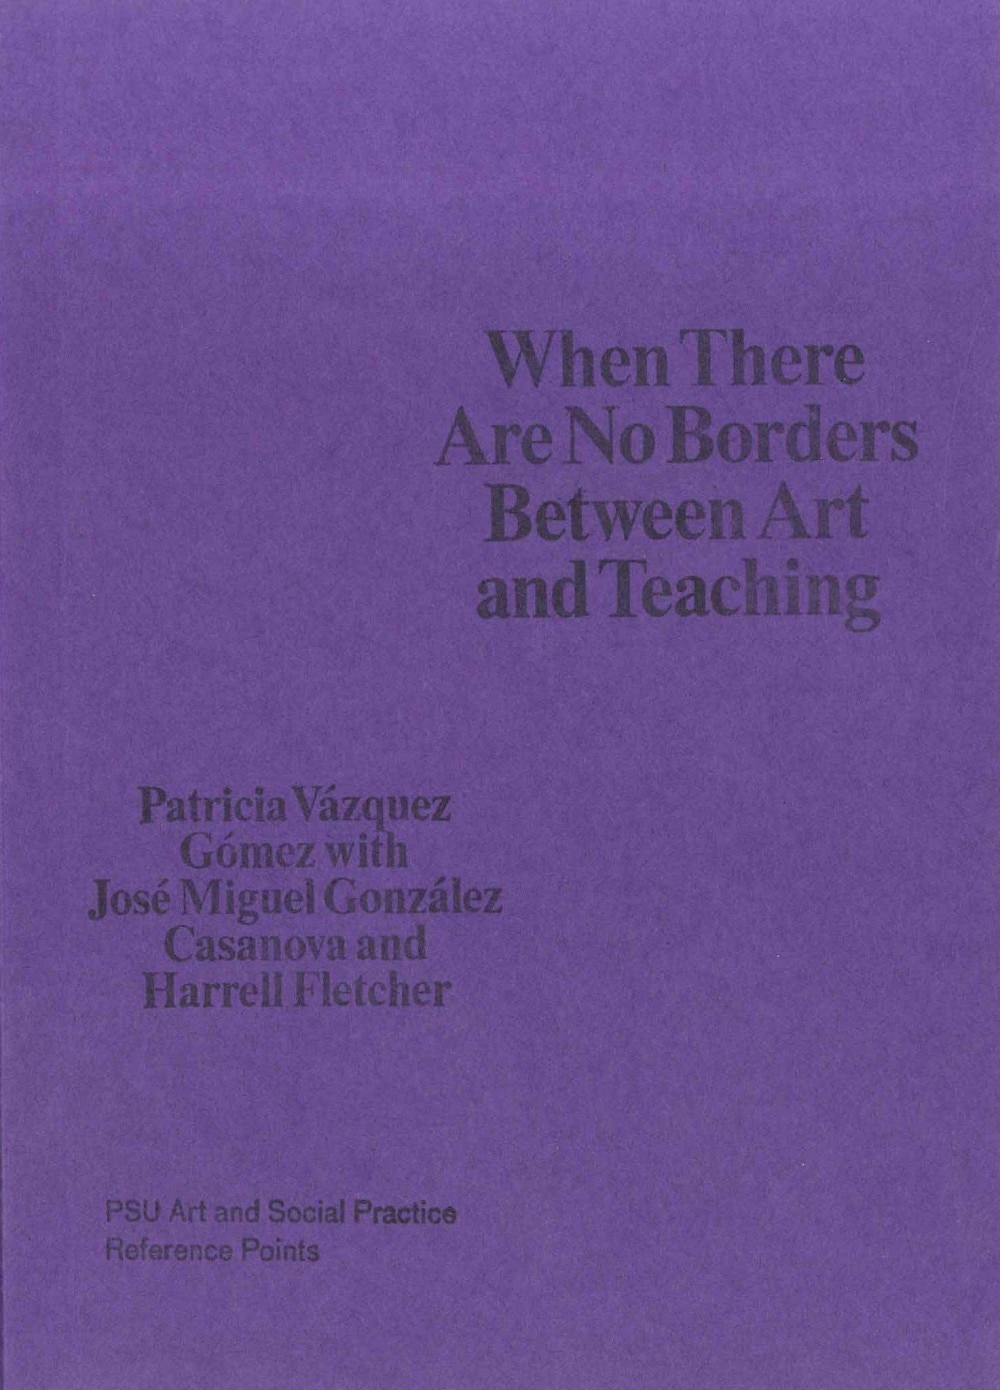 When There Are No Borders Between Art and Teaching